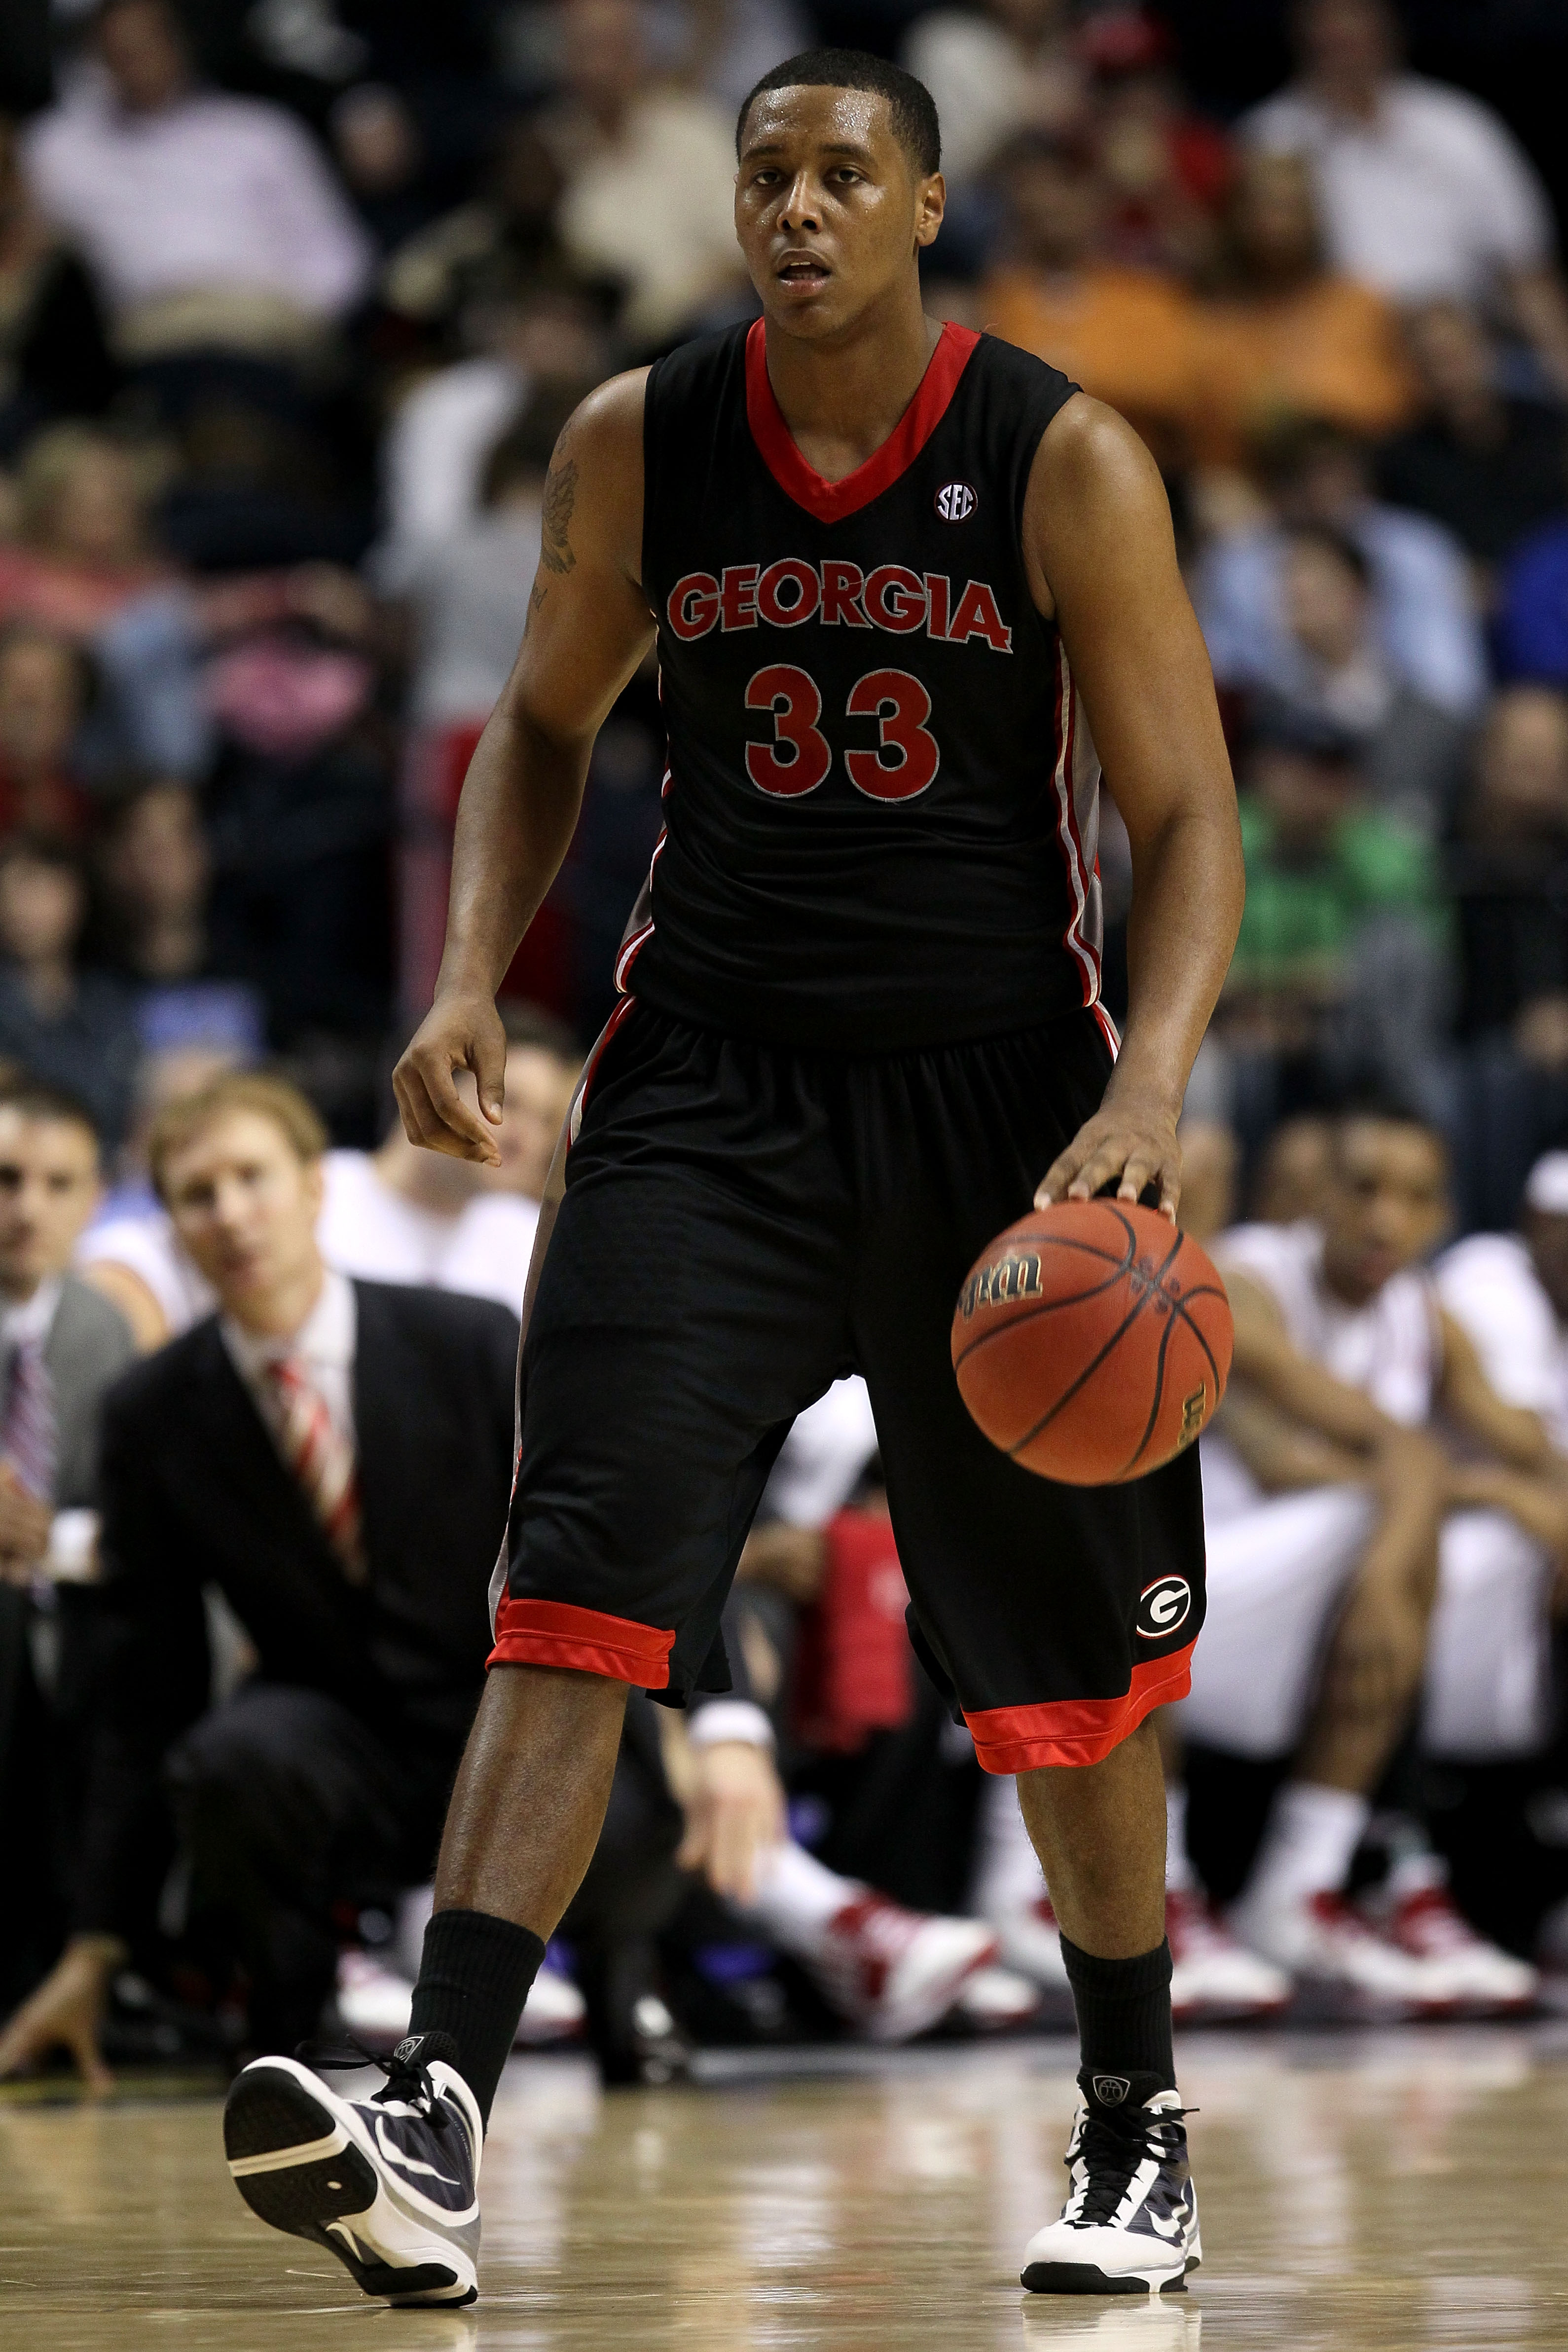 NASHVILLE, TN - MARCH 11:  Trey Thompkins #33 of the Georgia Bulldogs brings the ball up against the Arkanasas Razorbacks during the first round of the SEC Men's Basketball Tournament at the Bridgestone Arena on March 11, 2010 in Nashville, Tennessee.  (P